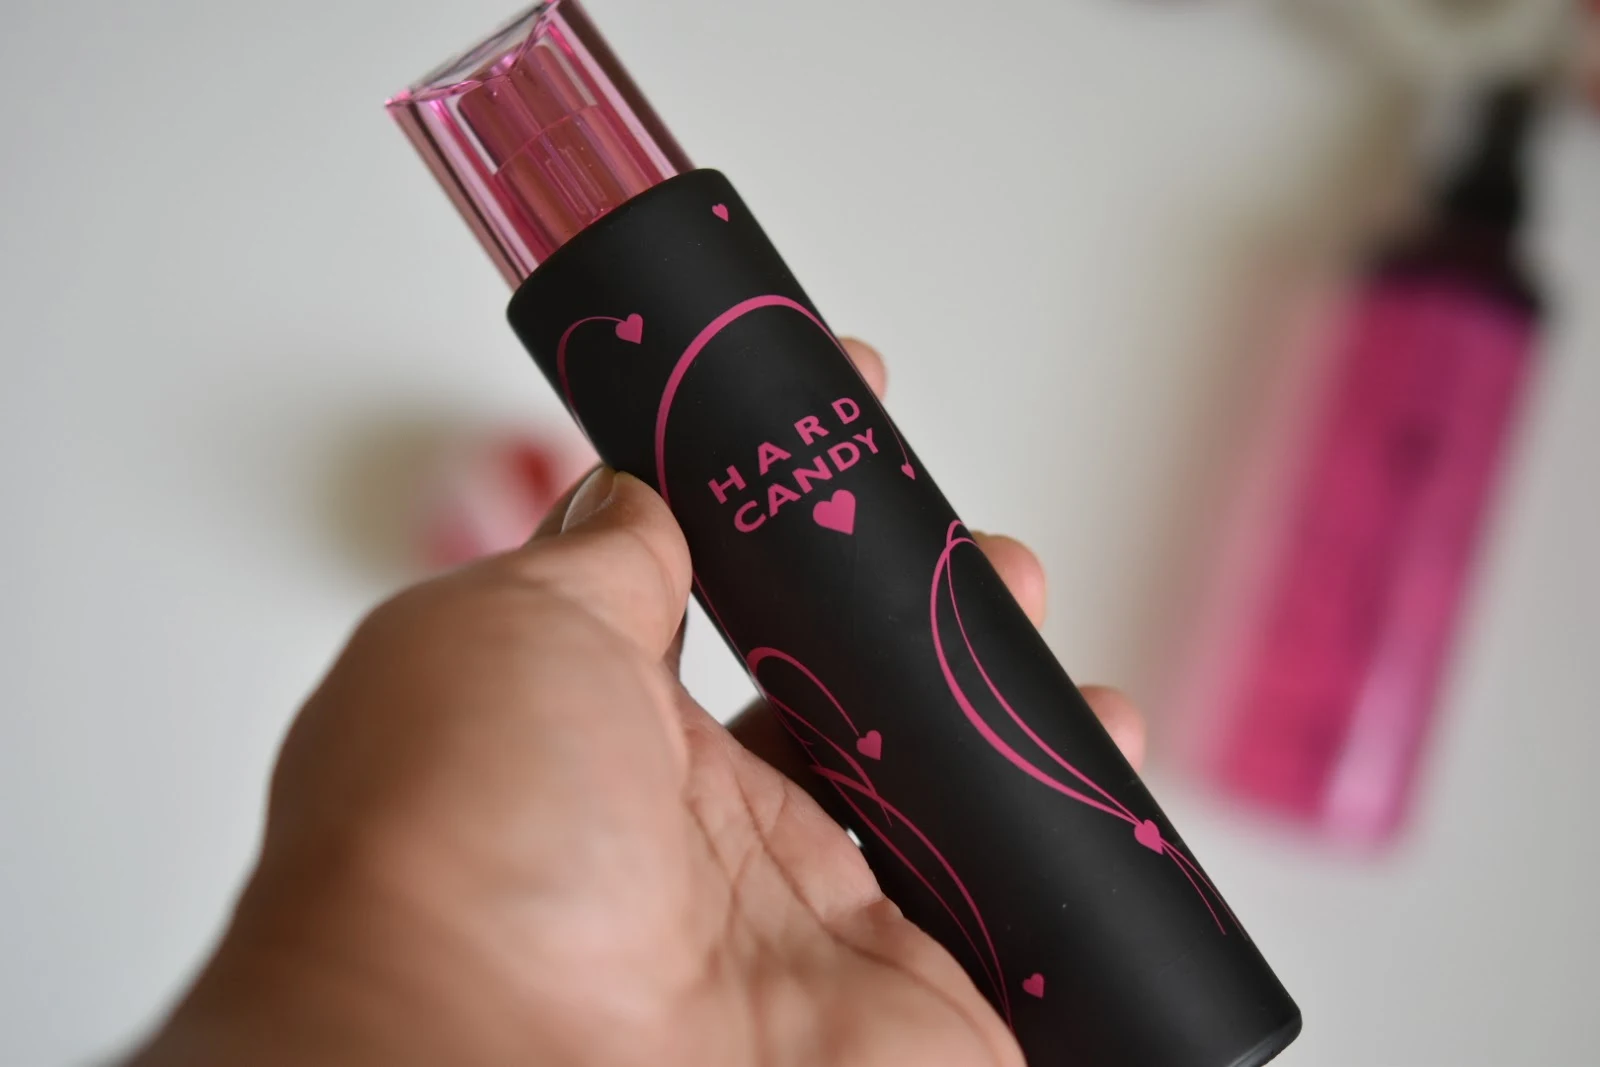 Last Minute Gift Ideas: Hard Candy Pink and Black Eau de Parfum and Body Mists  via  www.productreviewmom.com